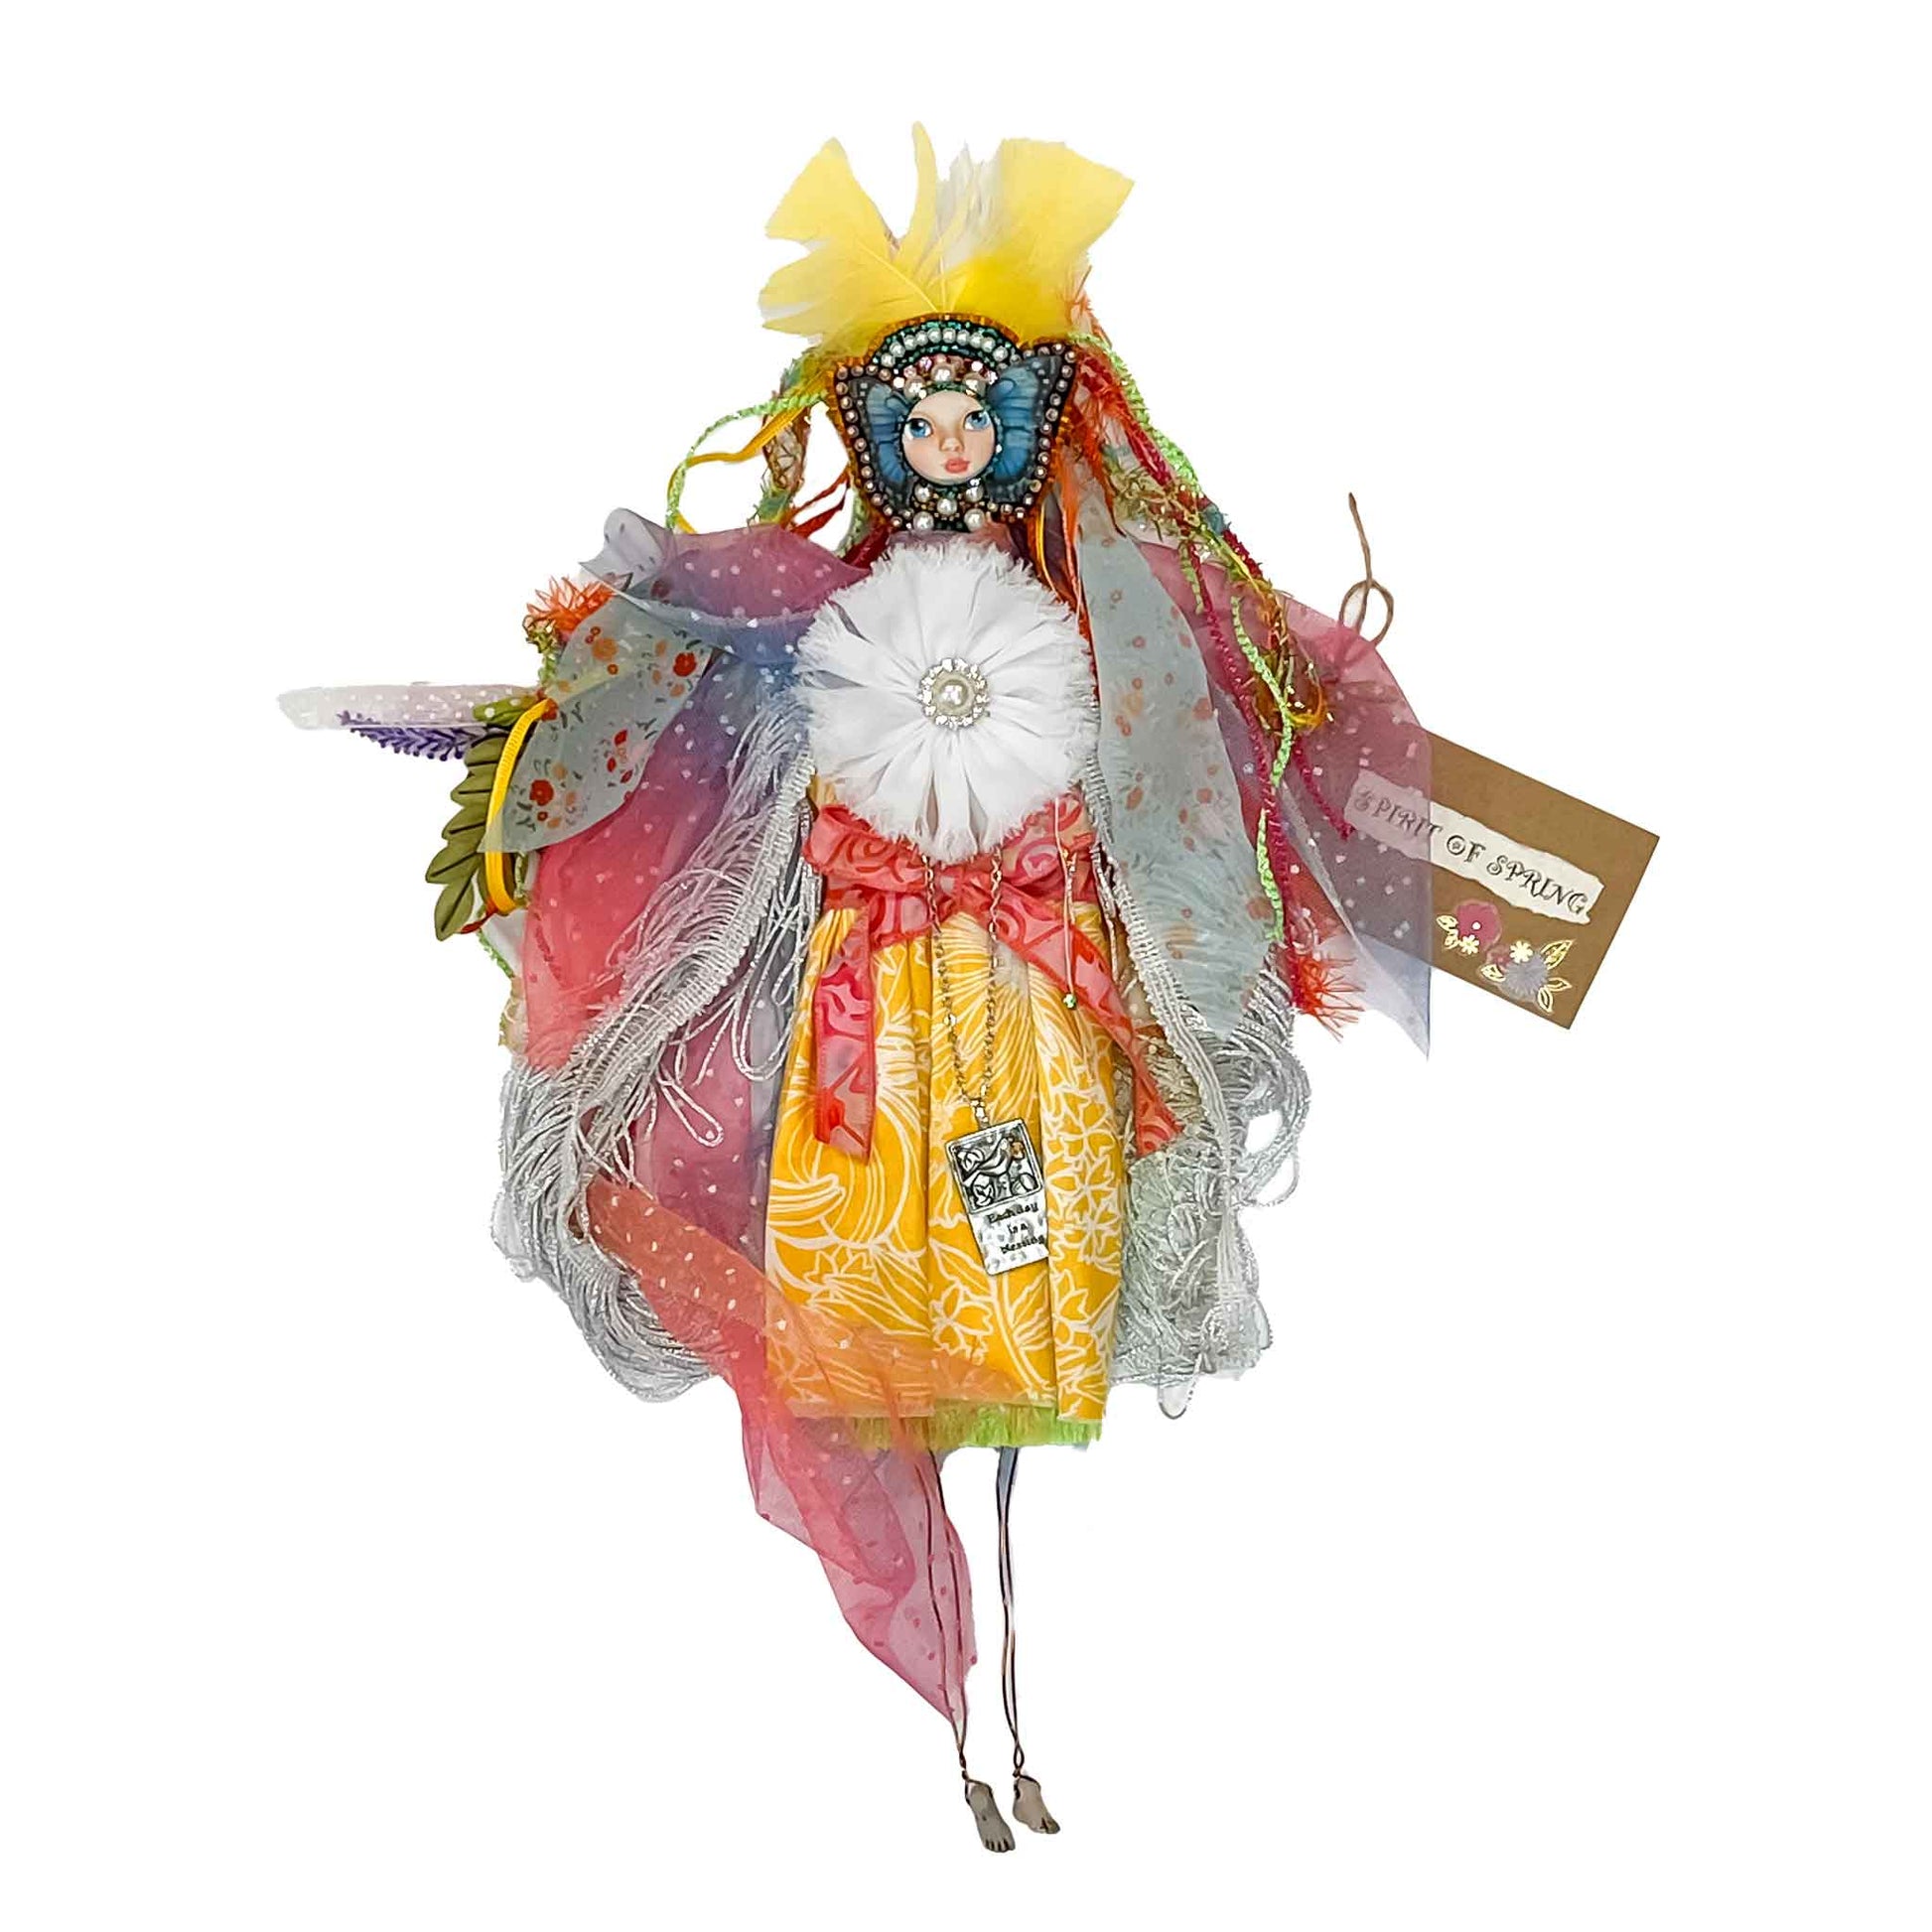 Multi-media, Wall hanging, Spirit Doll,  pastel colors,  bead embroidery,  fabric, netting, ribbons, yarn, pearls, ceramic face and feet, wood, wire, feathers, 19 inches Long x 11 inches Wide